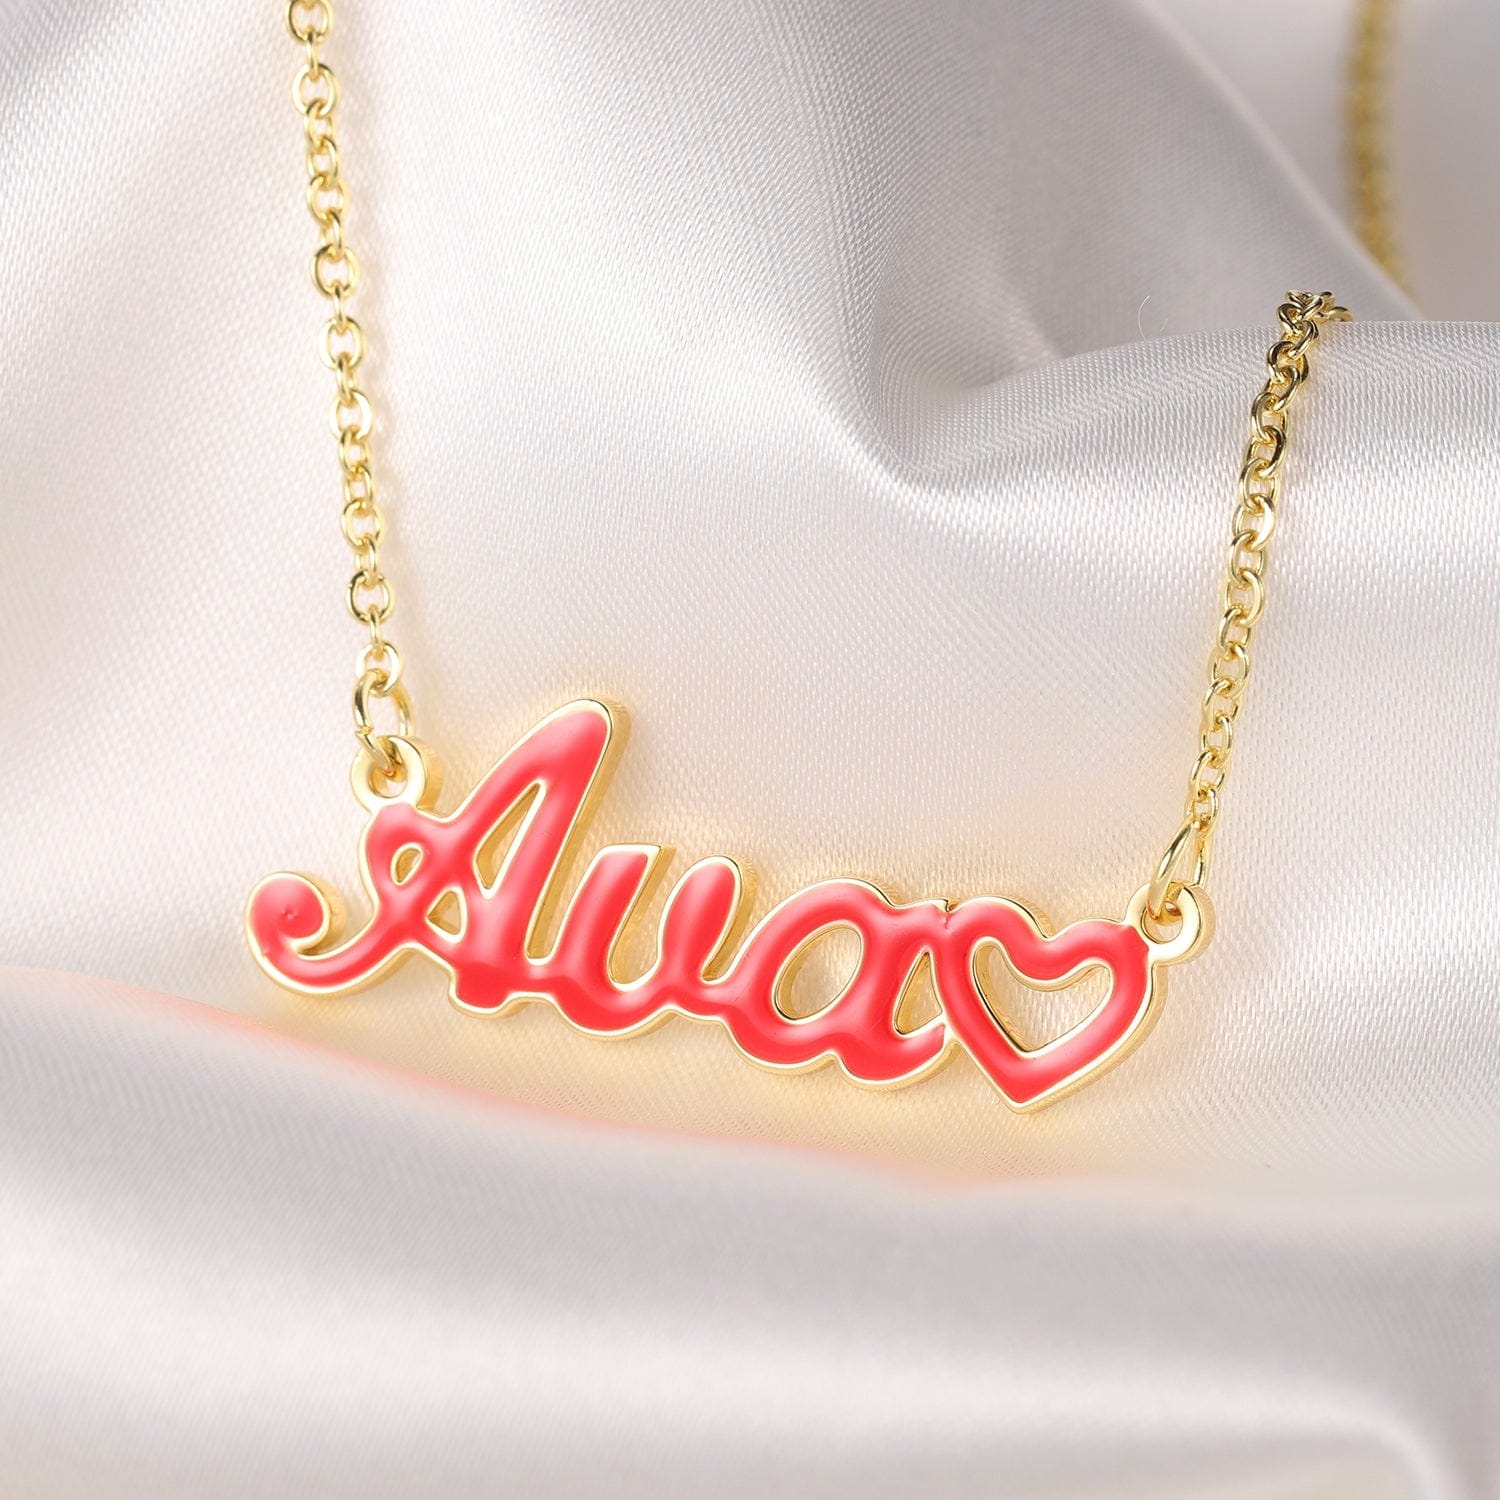 Custom Colored Enamel Name Necklace With Heart Accent